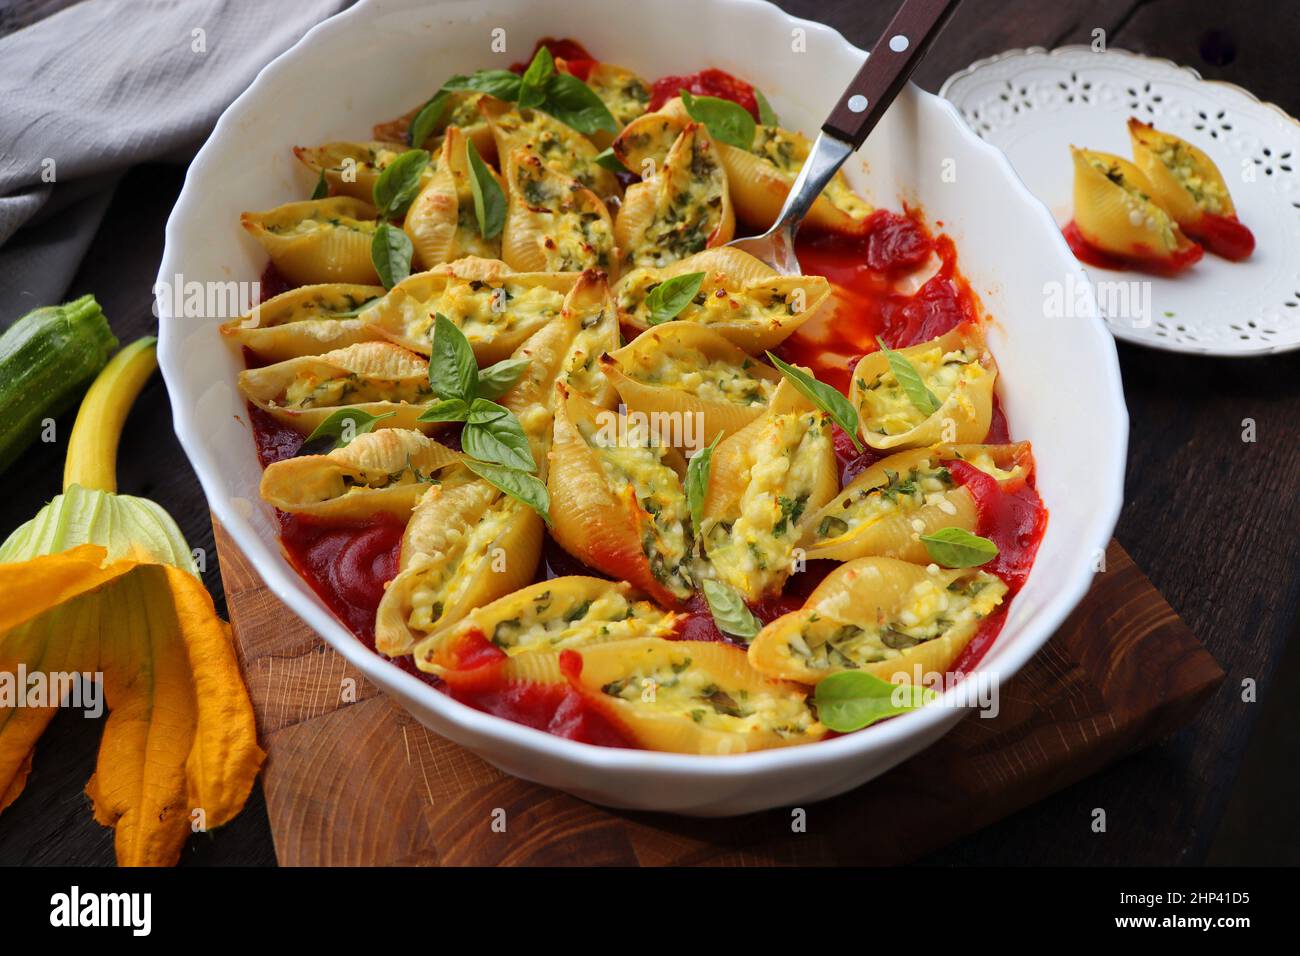 Big shell shape pasta stuffed with creamy soft cheese, zucchini and spinach sprinkled with parmesan cheese in baking dish wooden table, healthy dinner Stock Photo